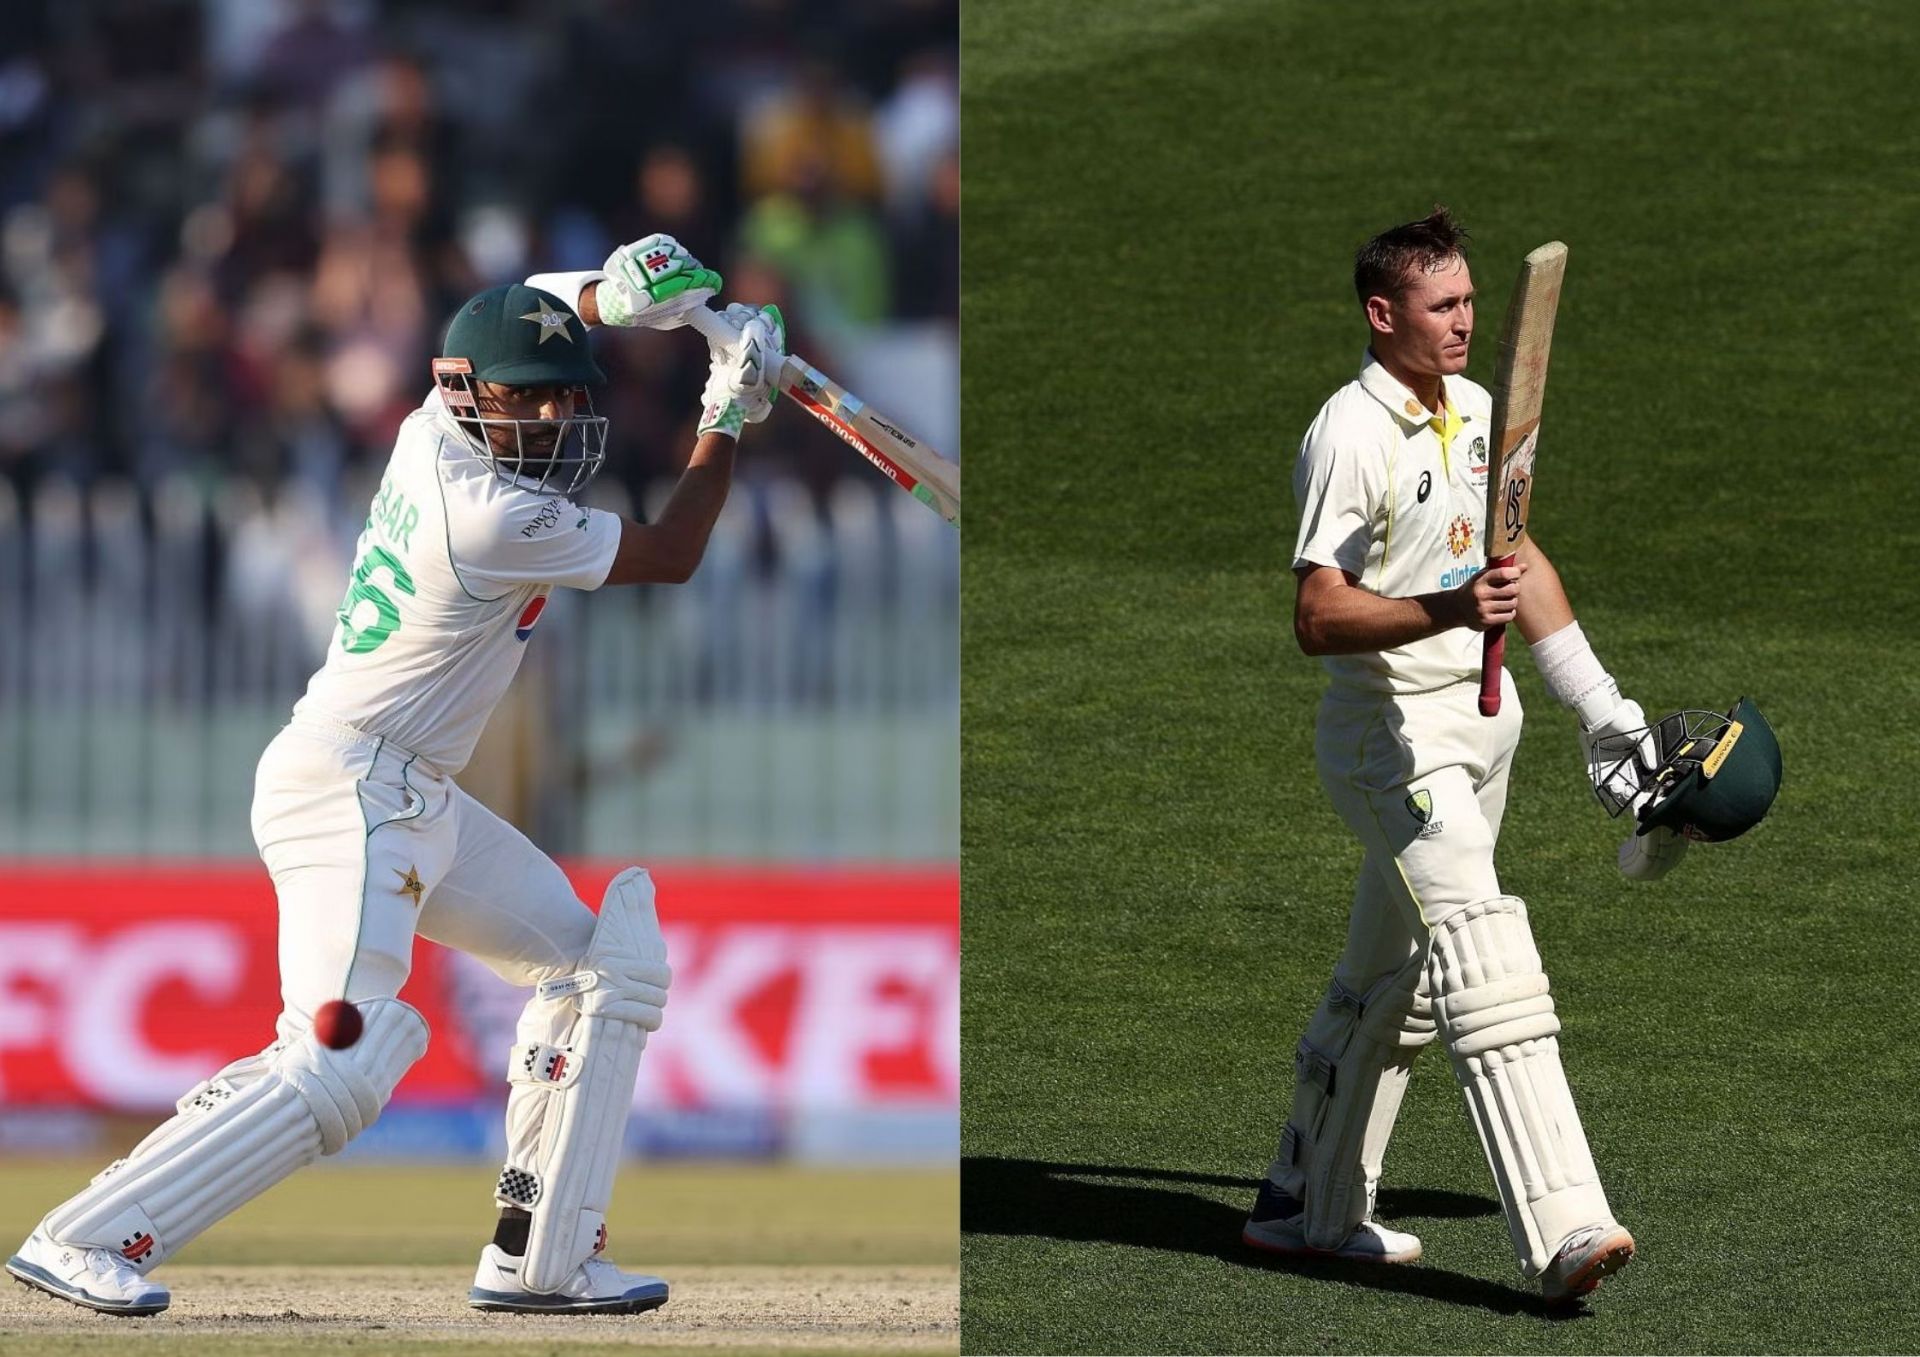 Babar Azam and Marnus Labuschagne were amongst the best batters in the just concluded WTC 2021-23 cycle.